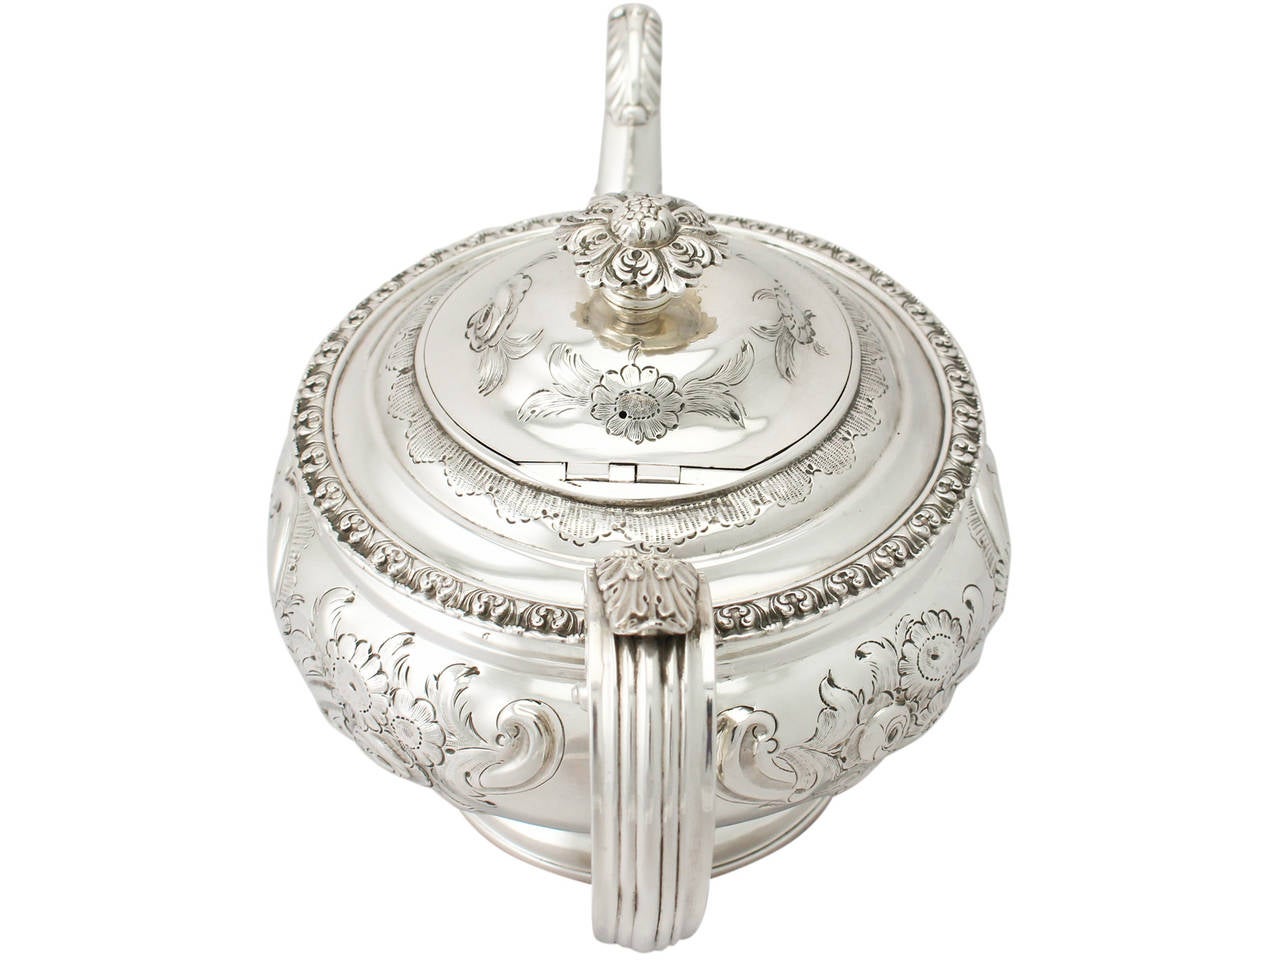 A fine antique George IV Scottish sterling silver teapot; part of our silver teaware collection.

This fine antique George IV Scottish sterling silver teapot has a circular compressed form onto a circular spreading foot.

The body of the teapot